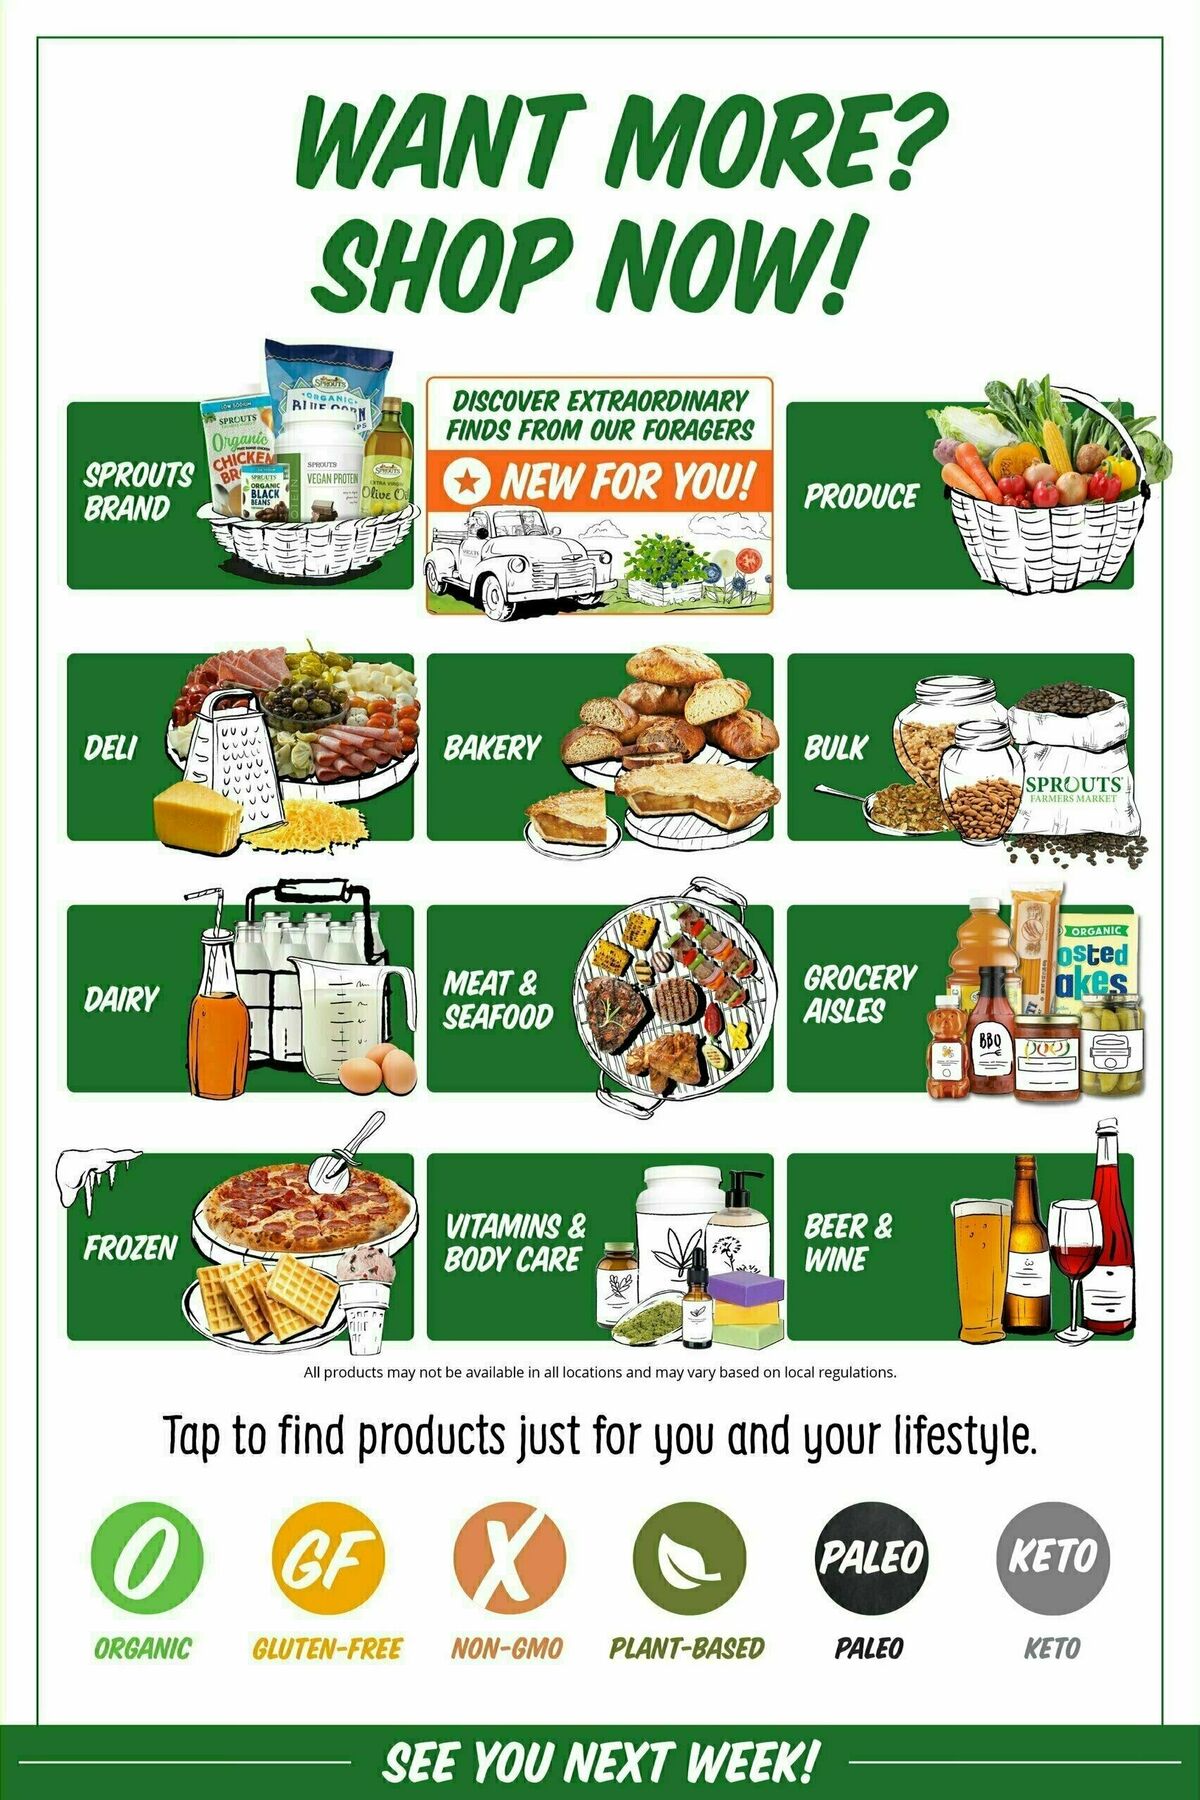 Sprouts Farmers Market Weekly Ad from January 31